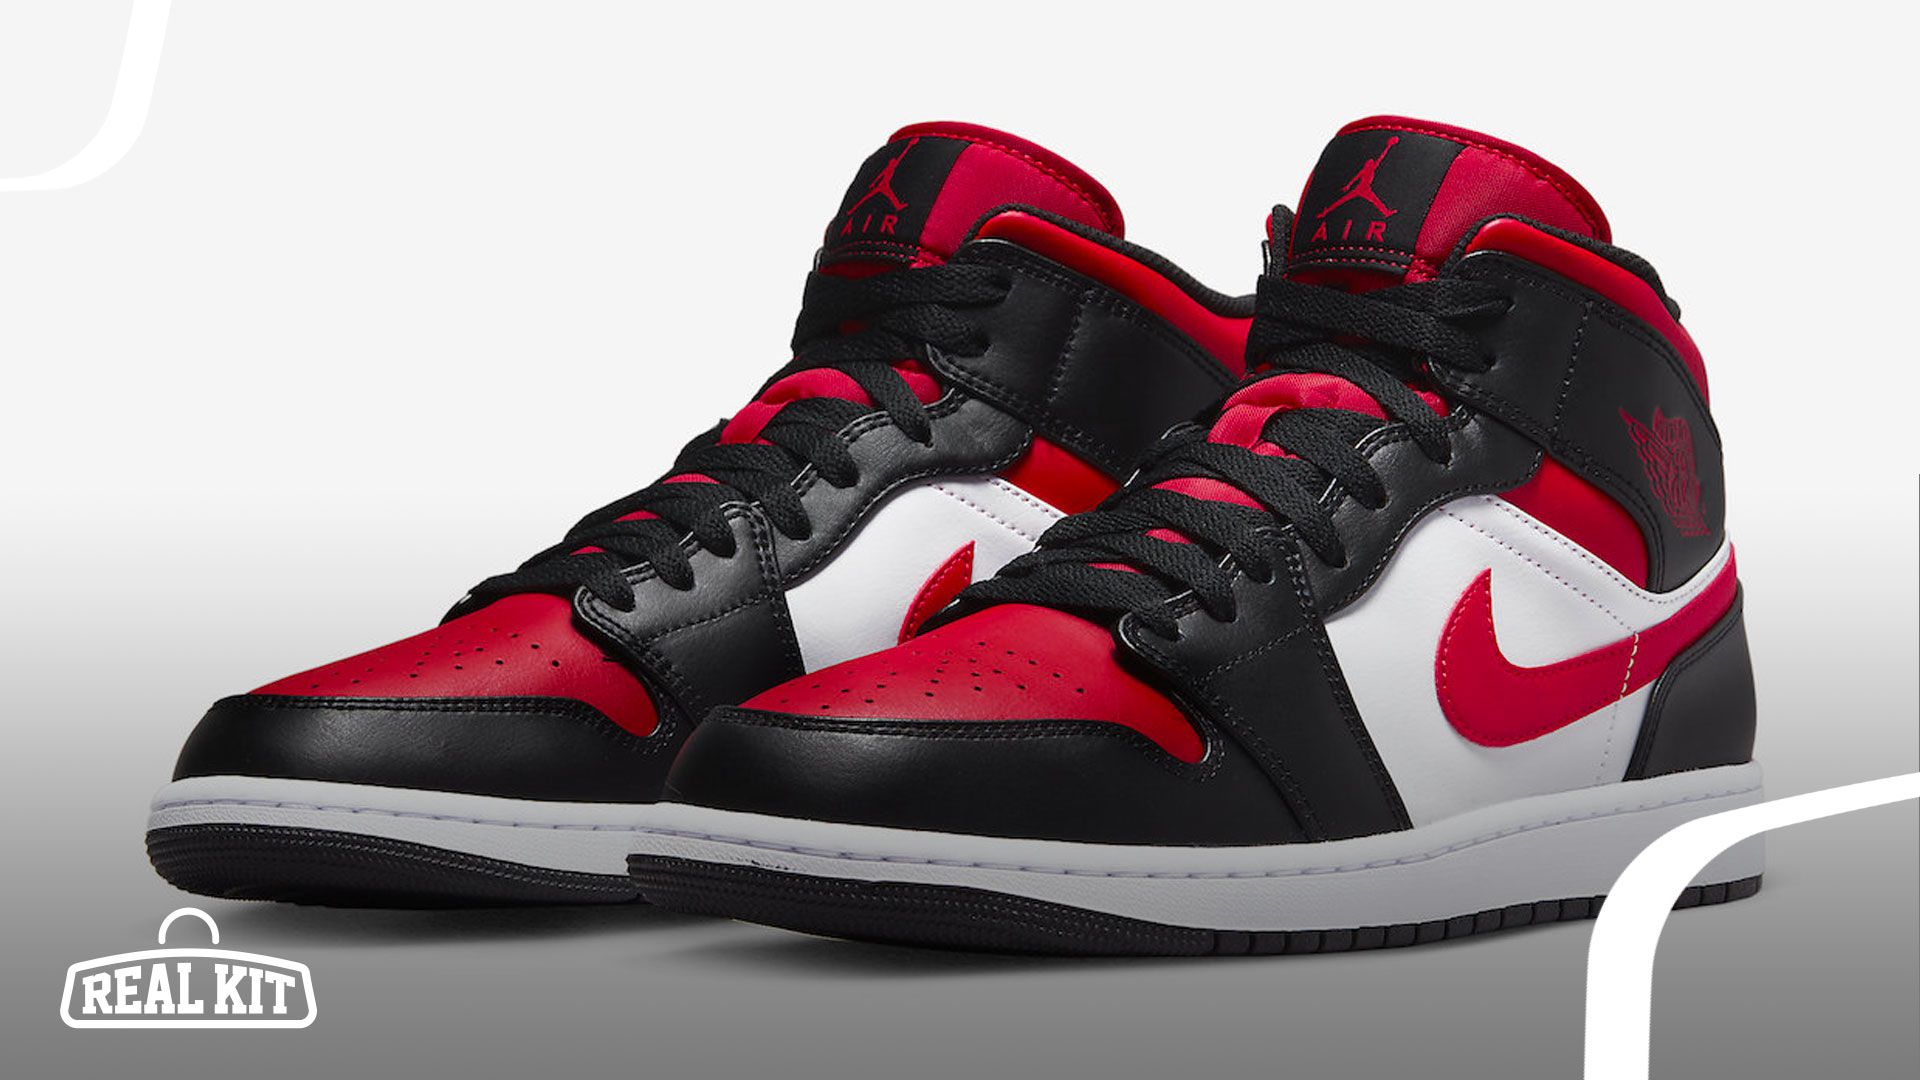 When Is The Air Jordan 1 Mid Bred Toe Release Date? Here's What We Know